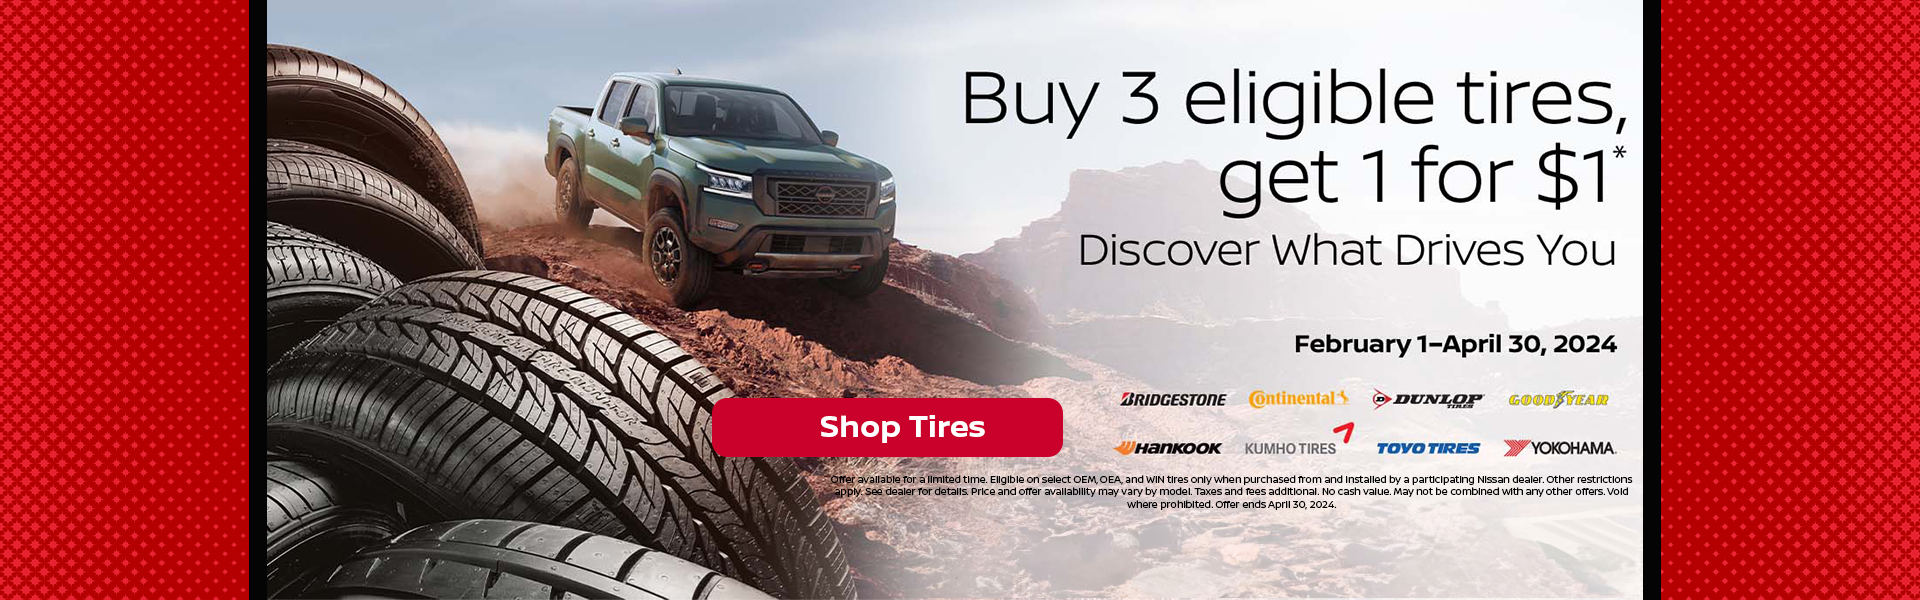 Buy 3 Tires Get 1 for $1